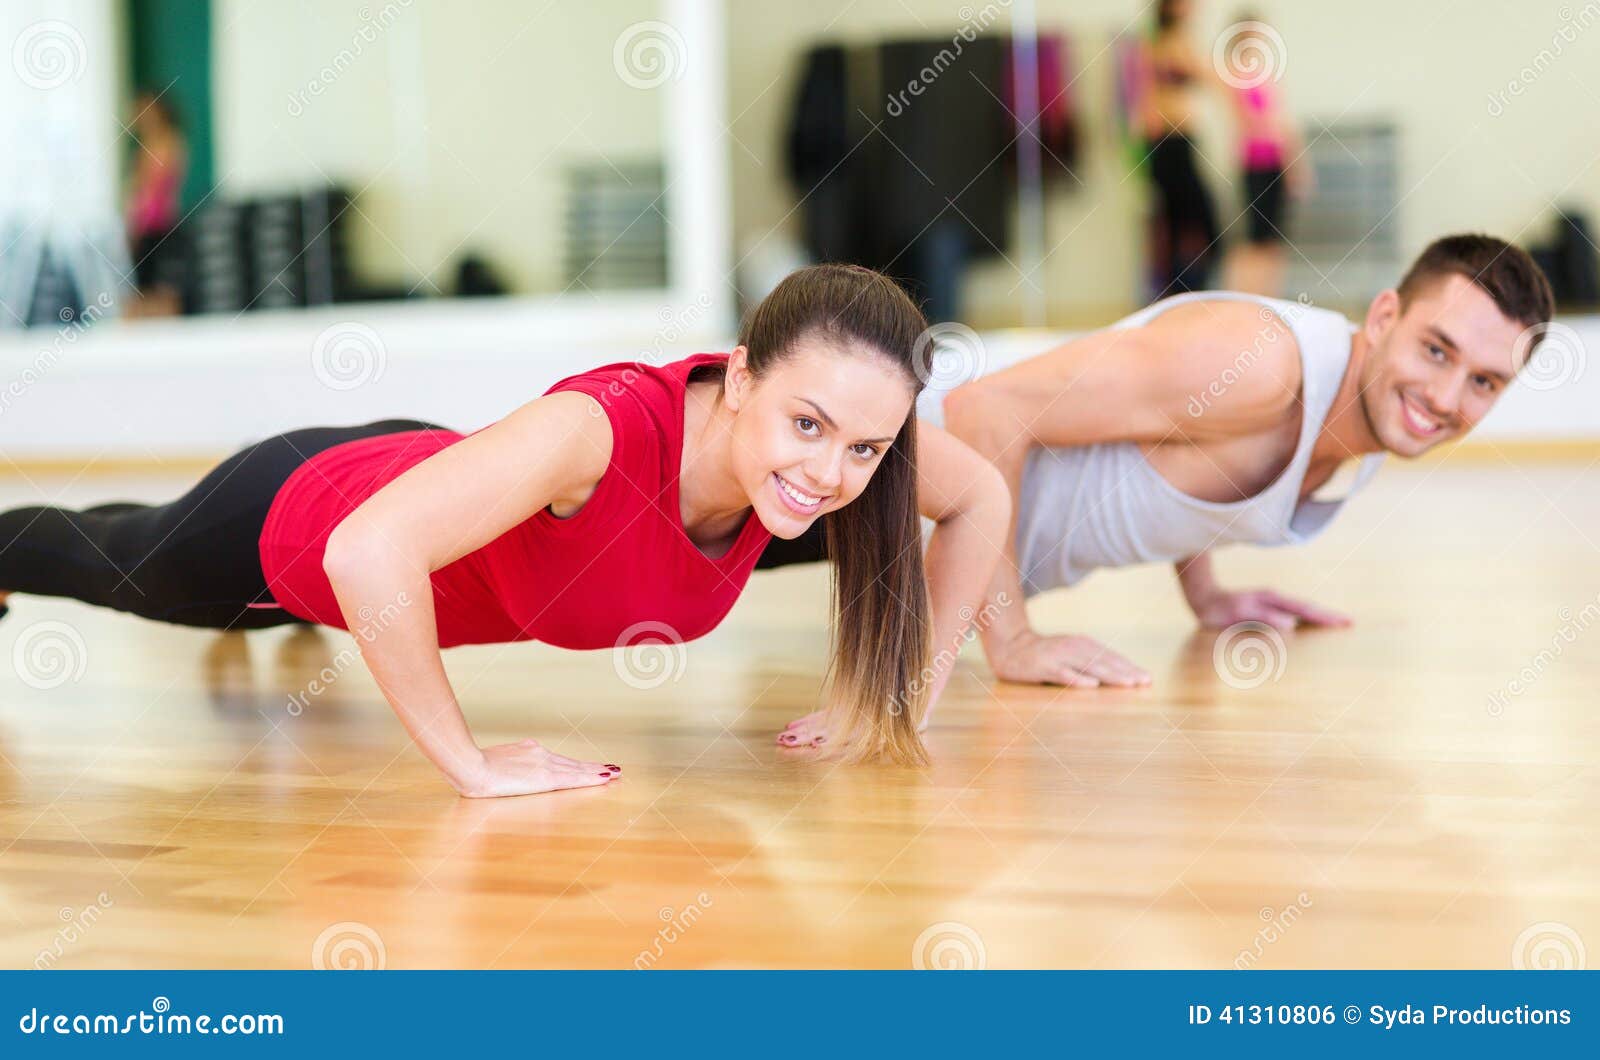 smiling couple doing push-ups in the gym